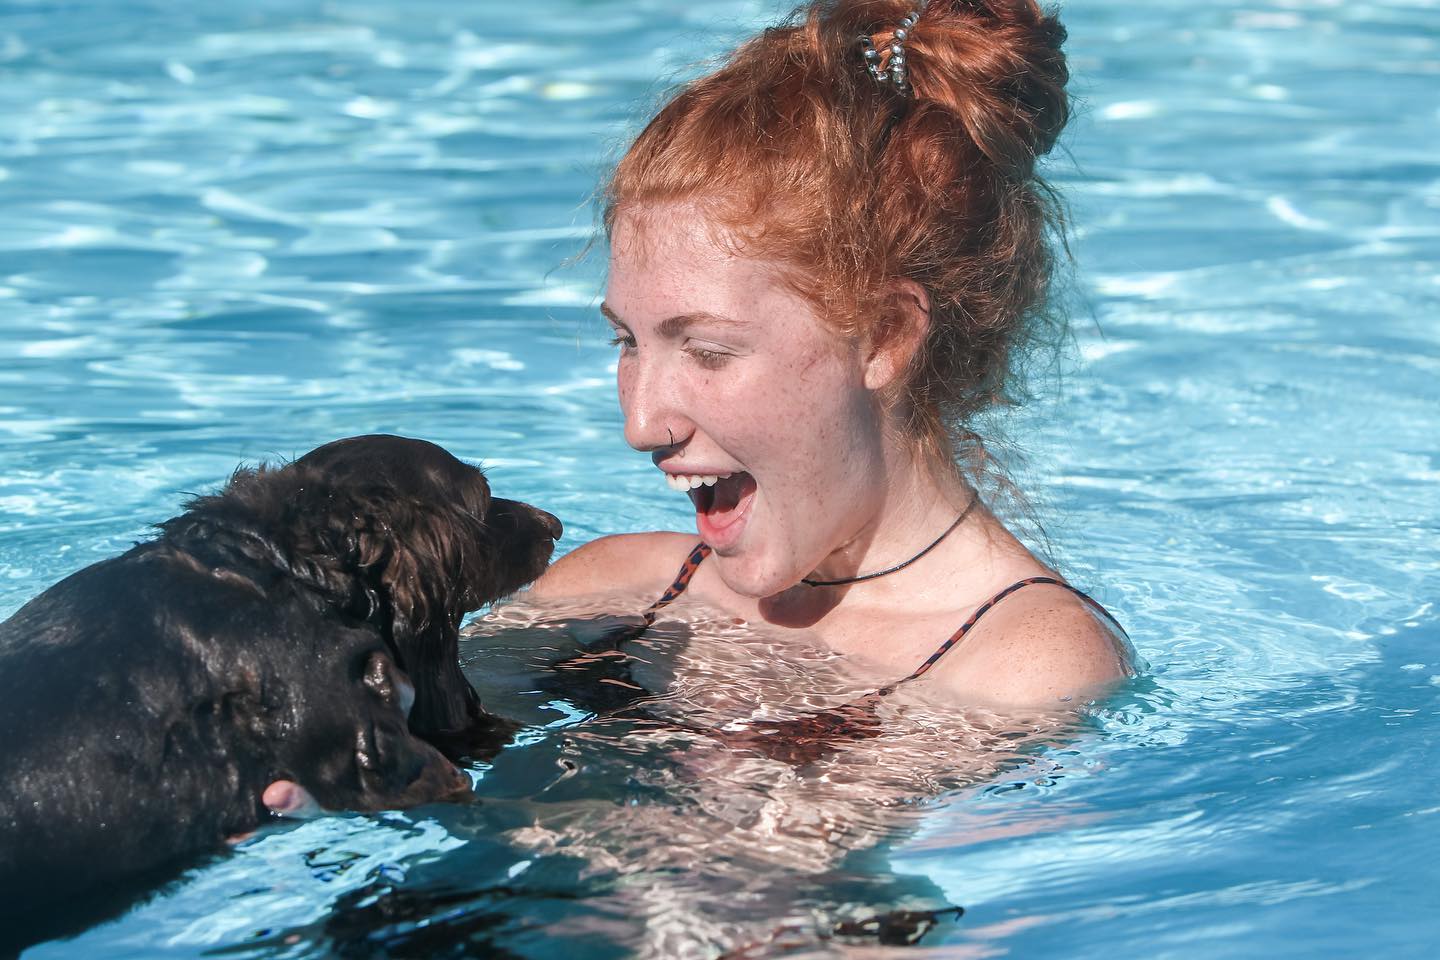 Dachshund playing in pool with girl